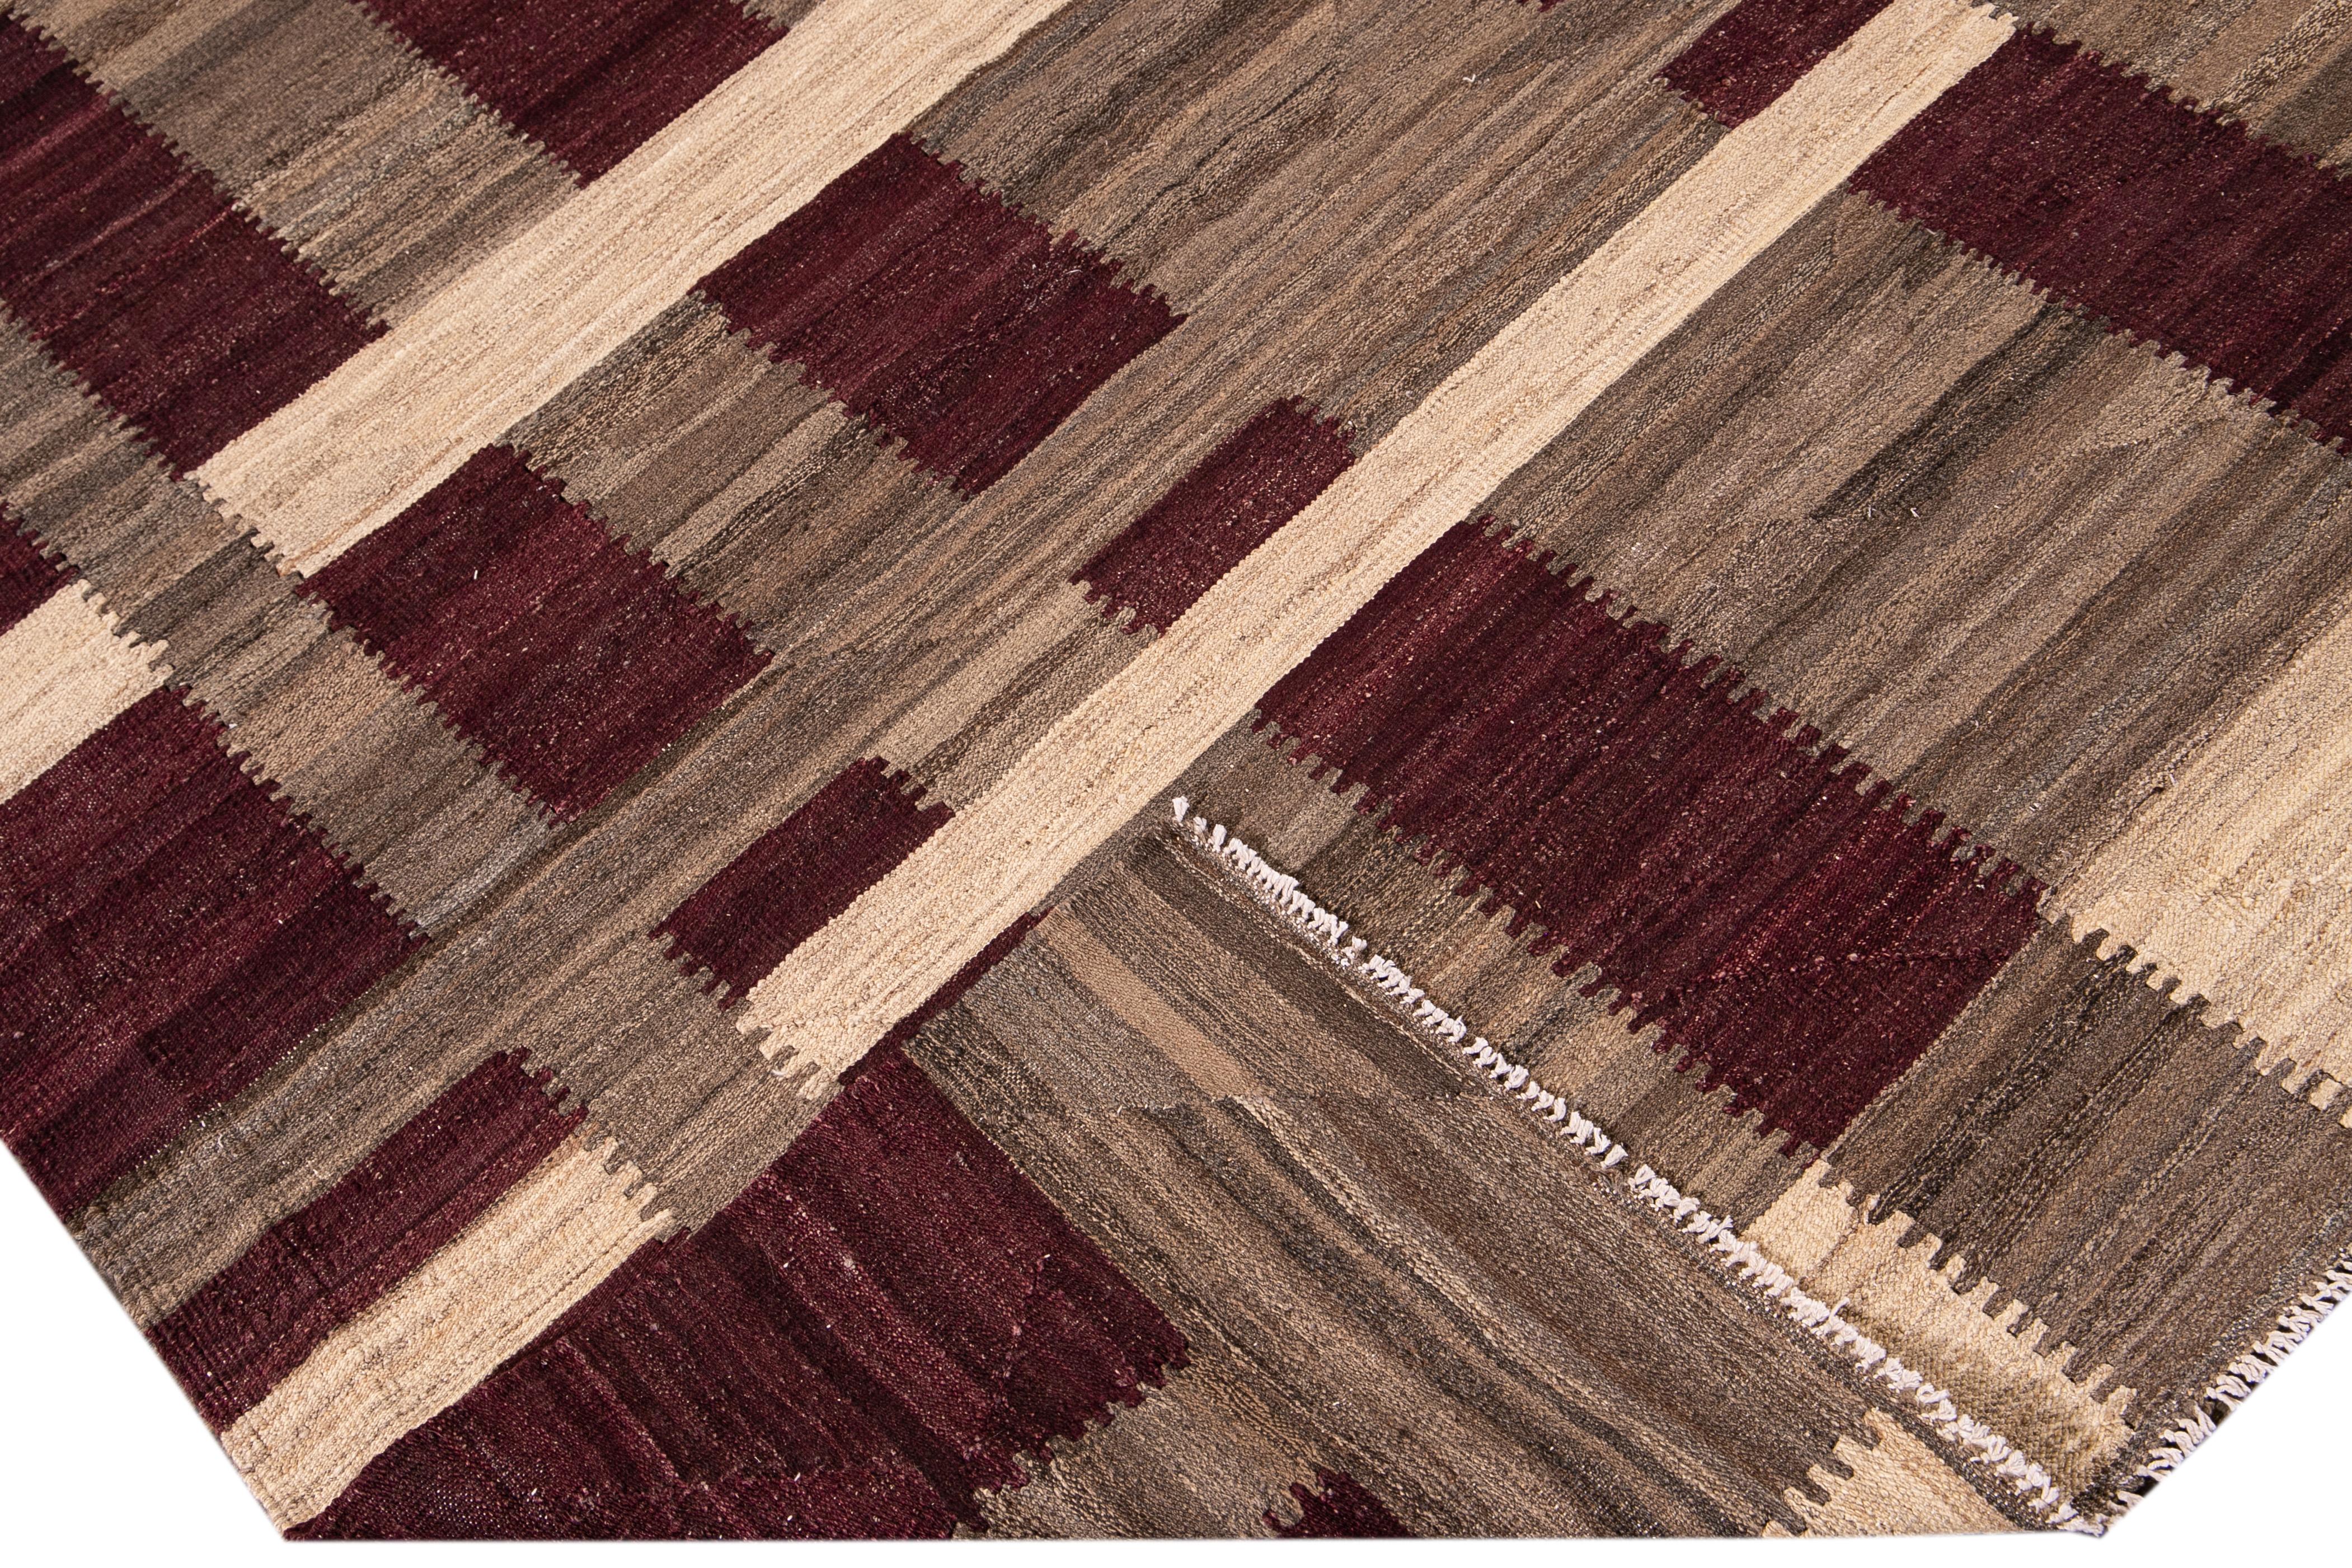 Beautiful modern Kilim flat-weave wool rug with a beige and brown field. This piece of art has burgundy accents in a gorgeous geometric check pattern design.

This rug measures: 8'5